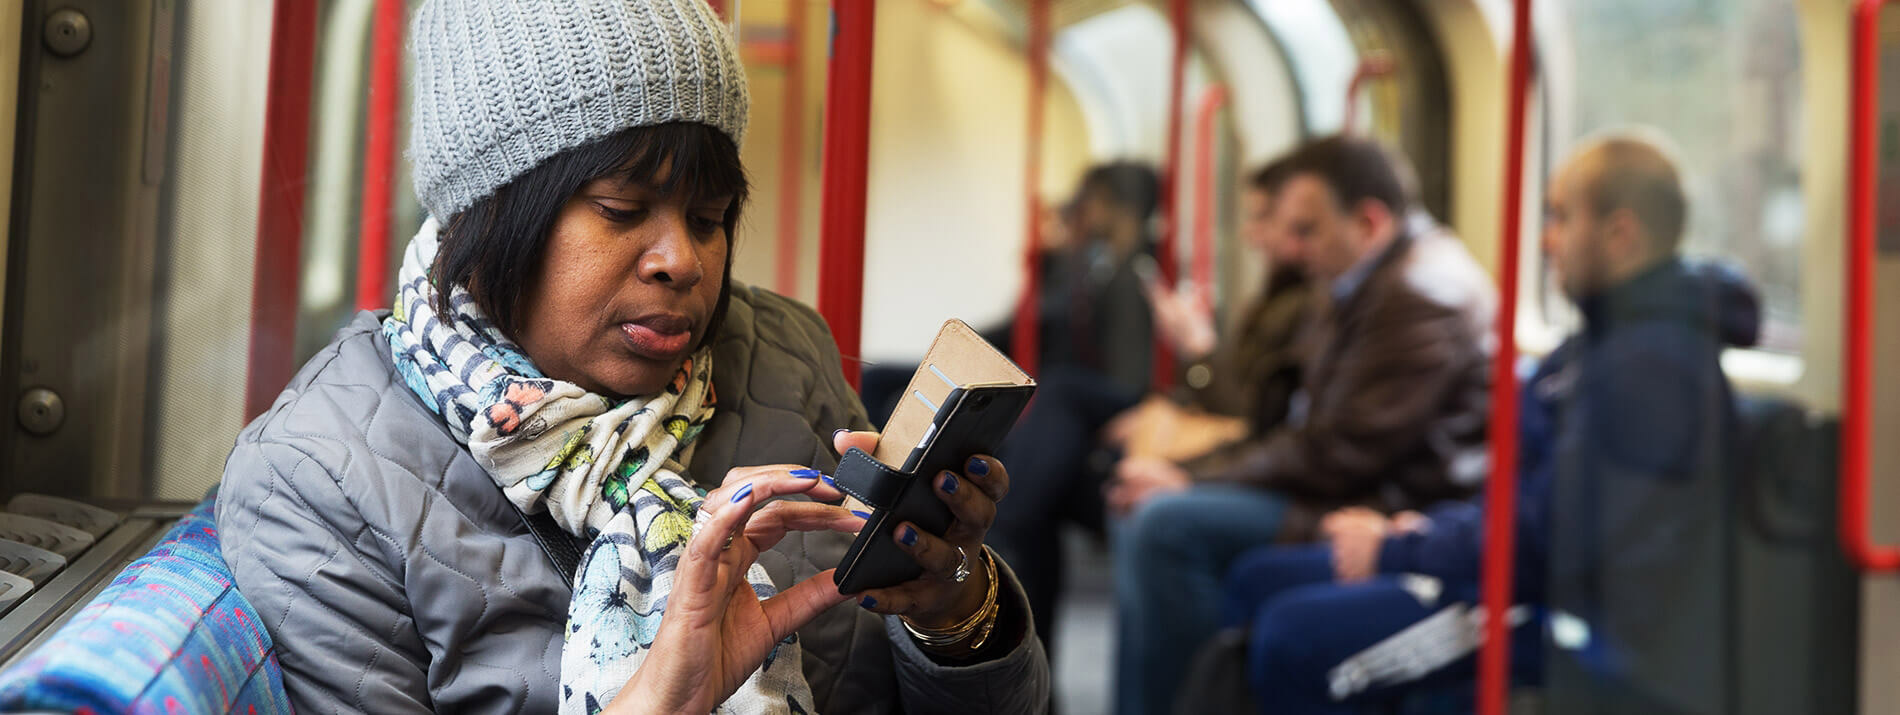 Woman sitting in a train browsing her smartphone.